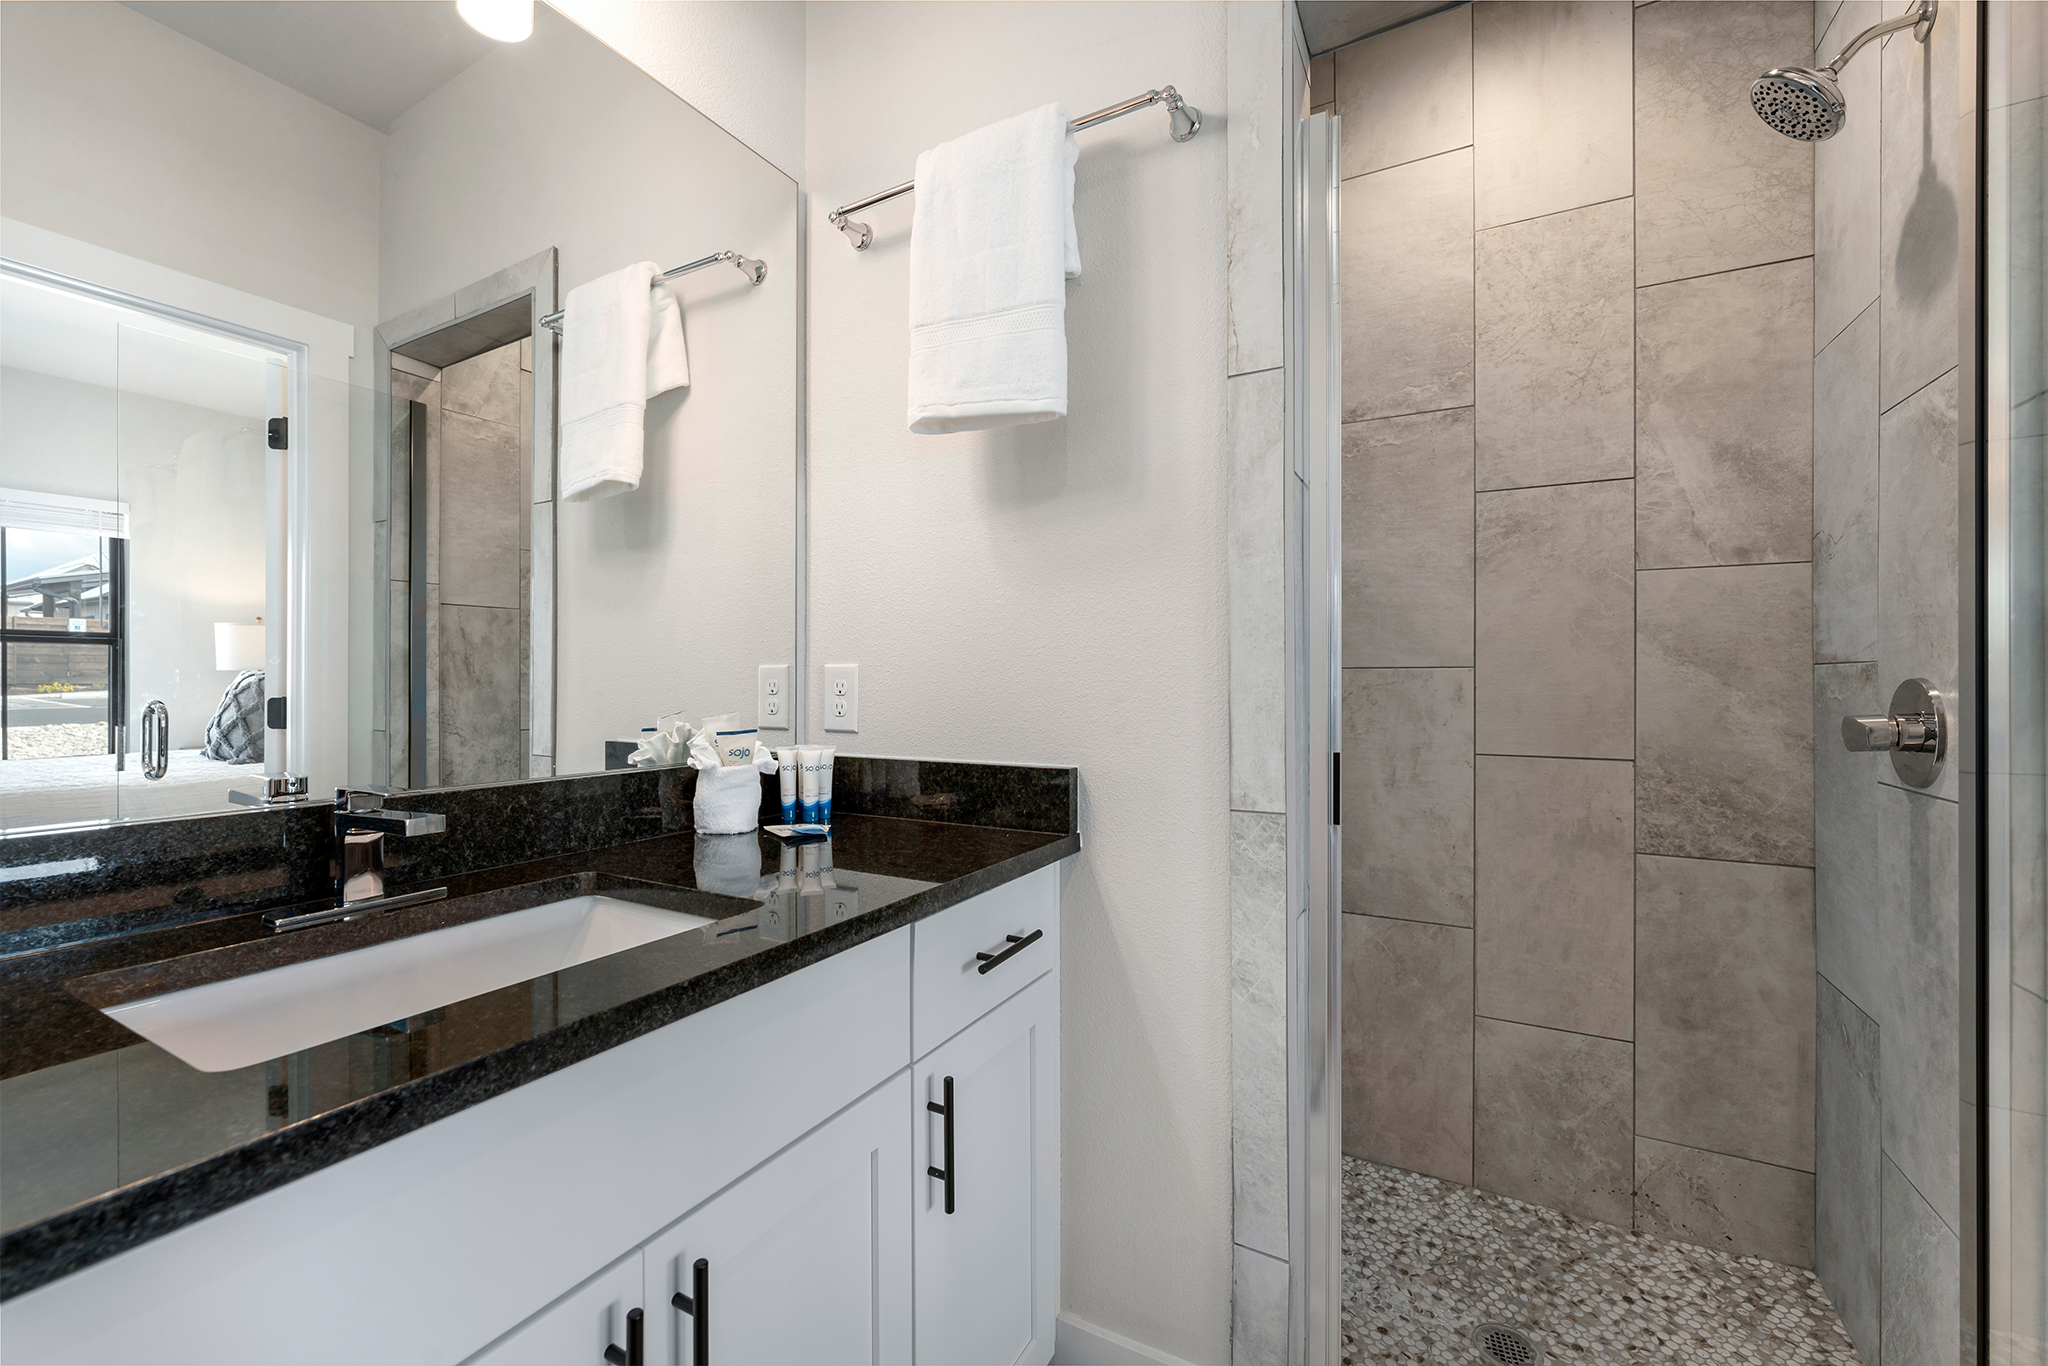 Unit 104 - The bathroom features a spacious walk-in shower